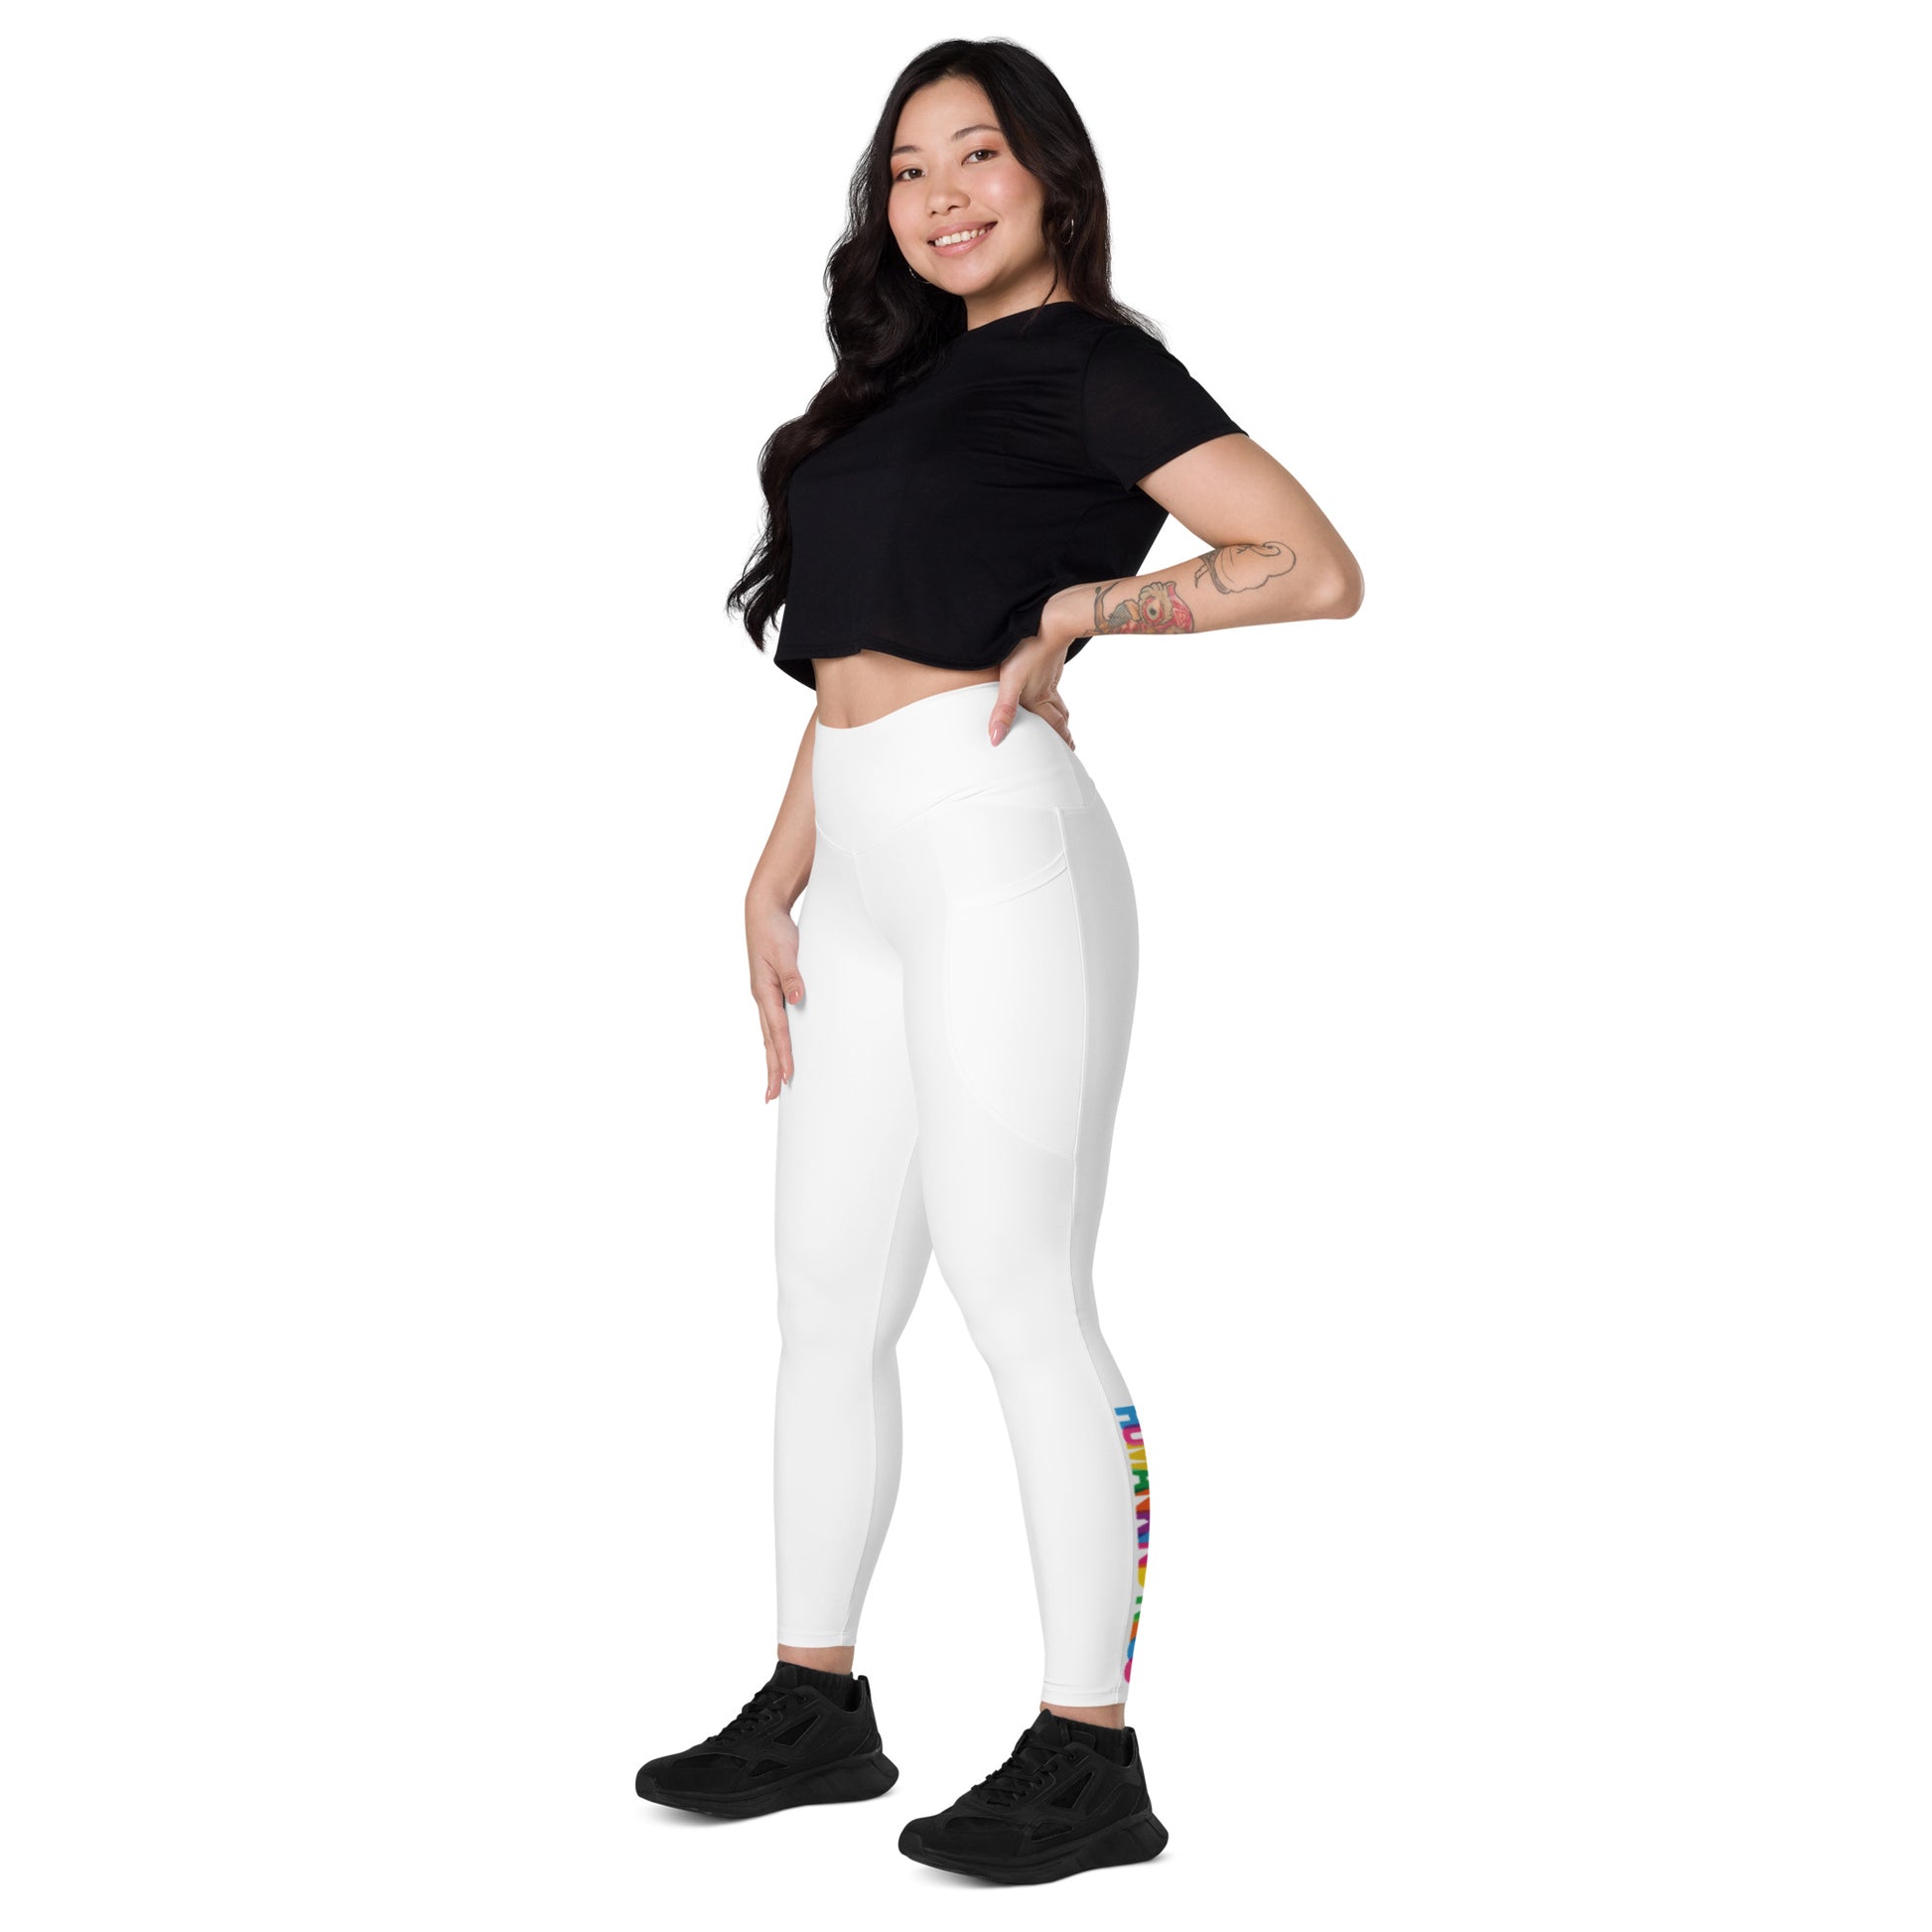 Whilte leggings with pockets